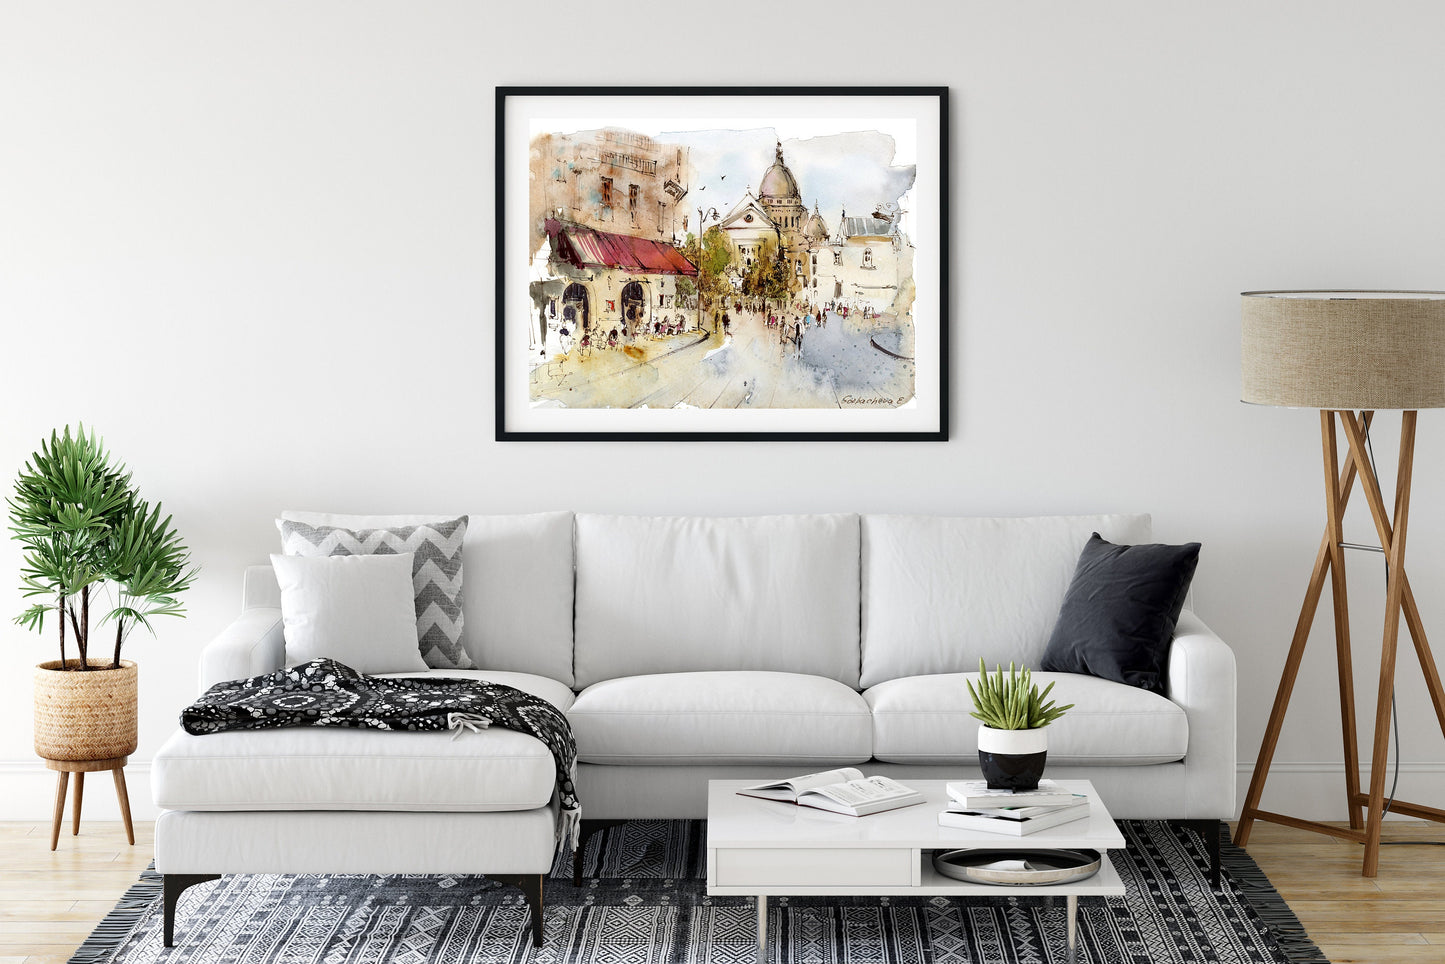 Paris Montmartre Art Print, Europe, France, Modern Architectural Wall Decor, Gift Ideas For Her, French Illustration